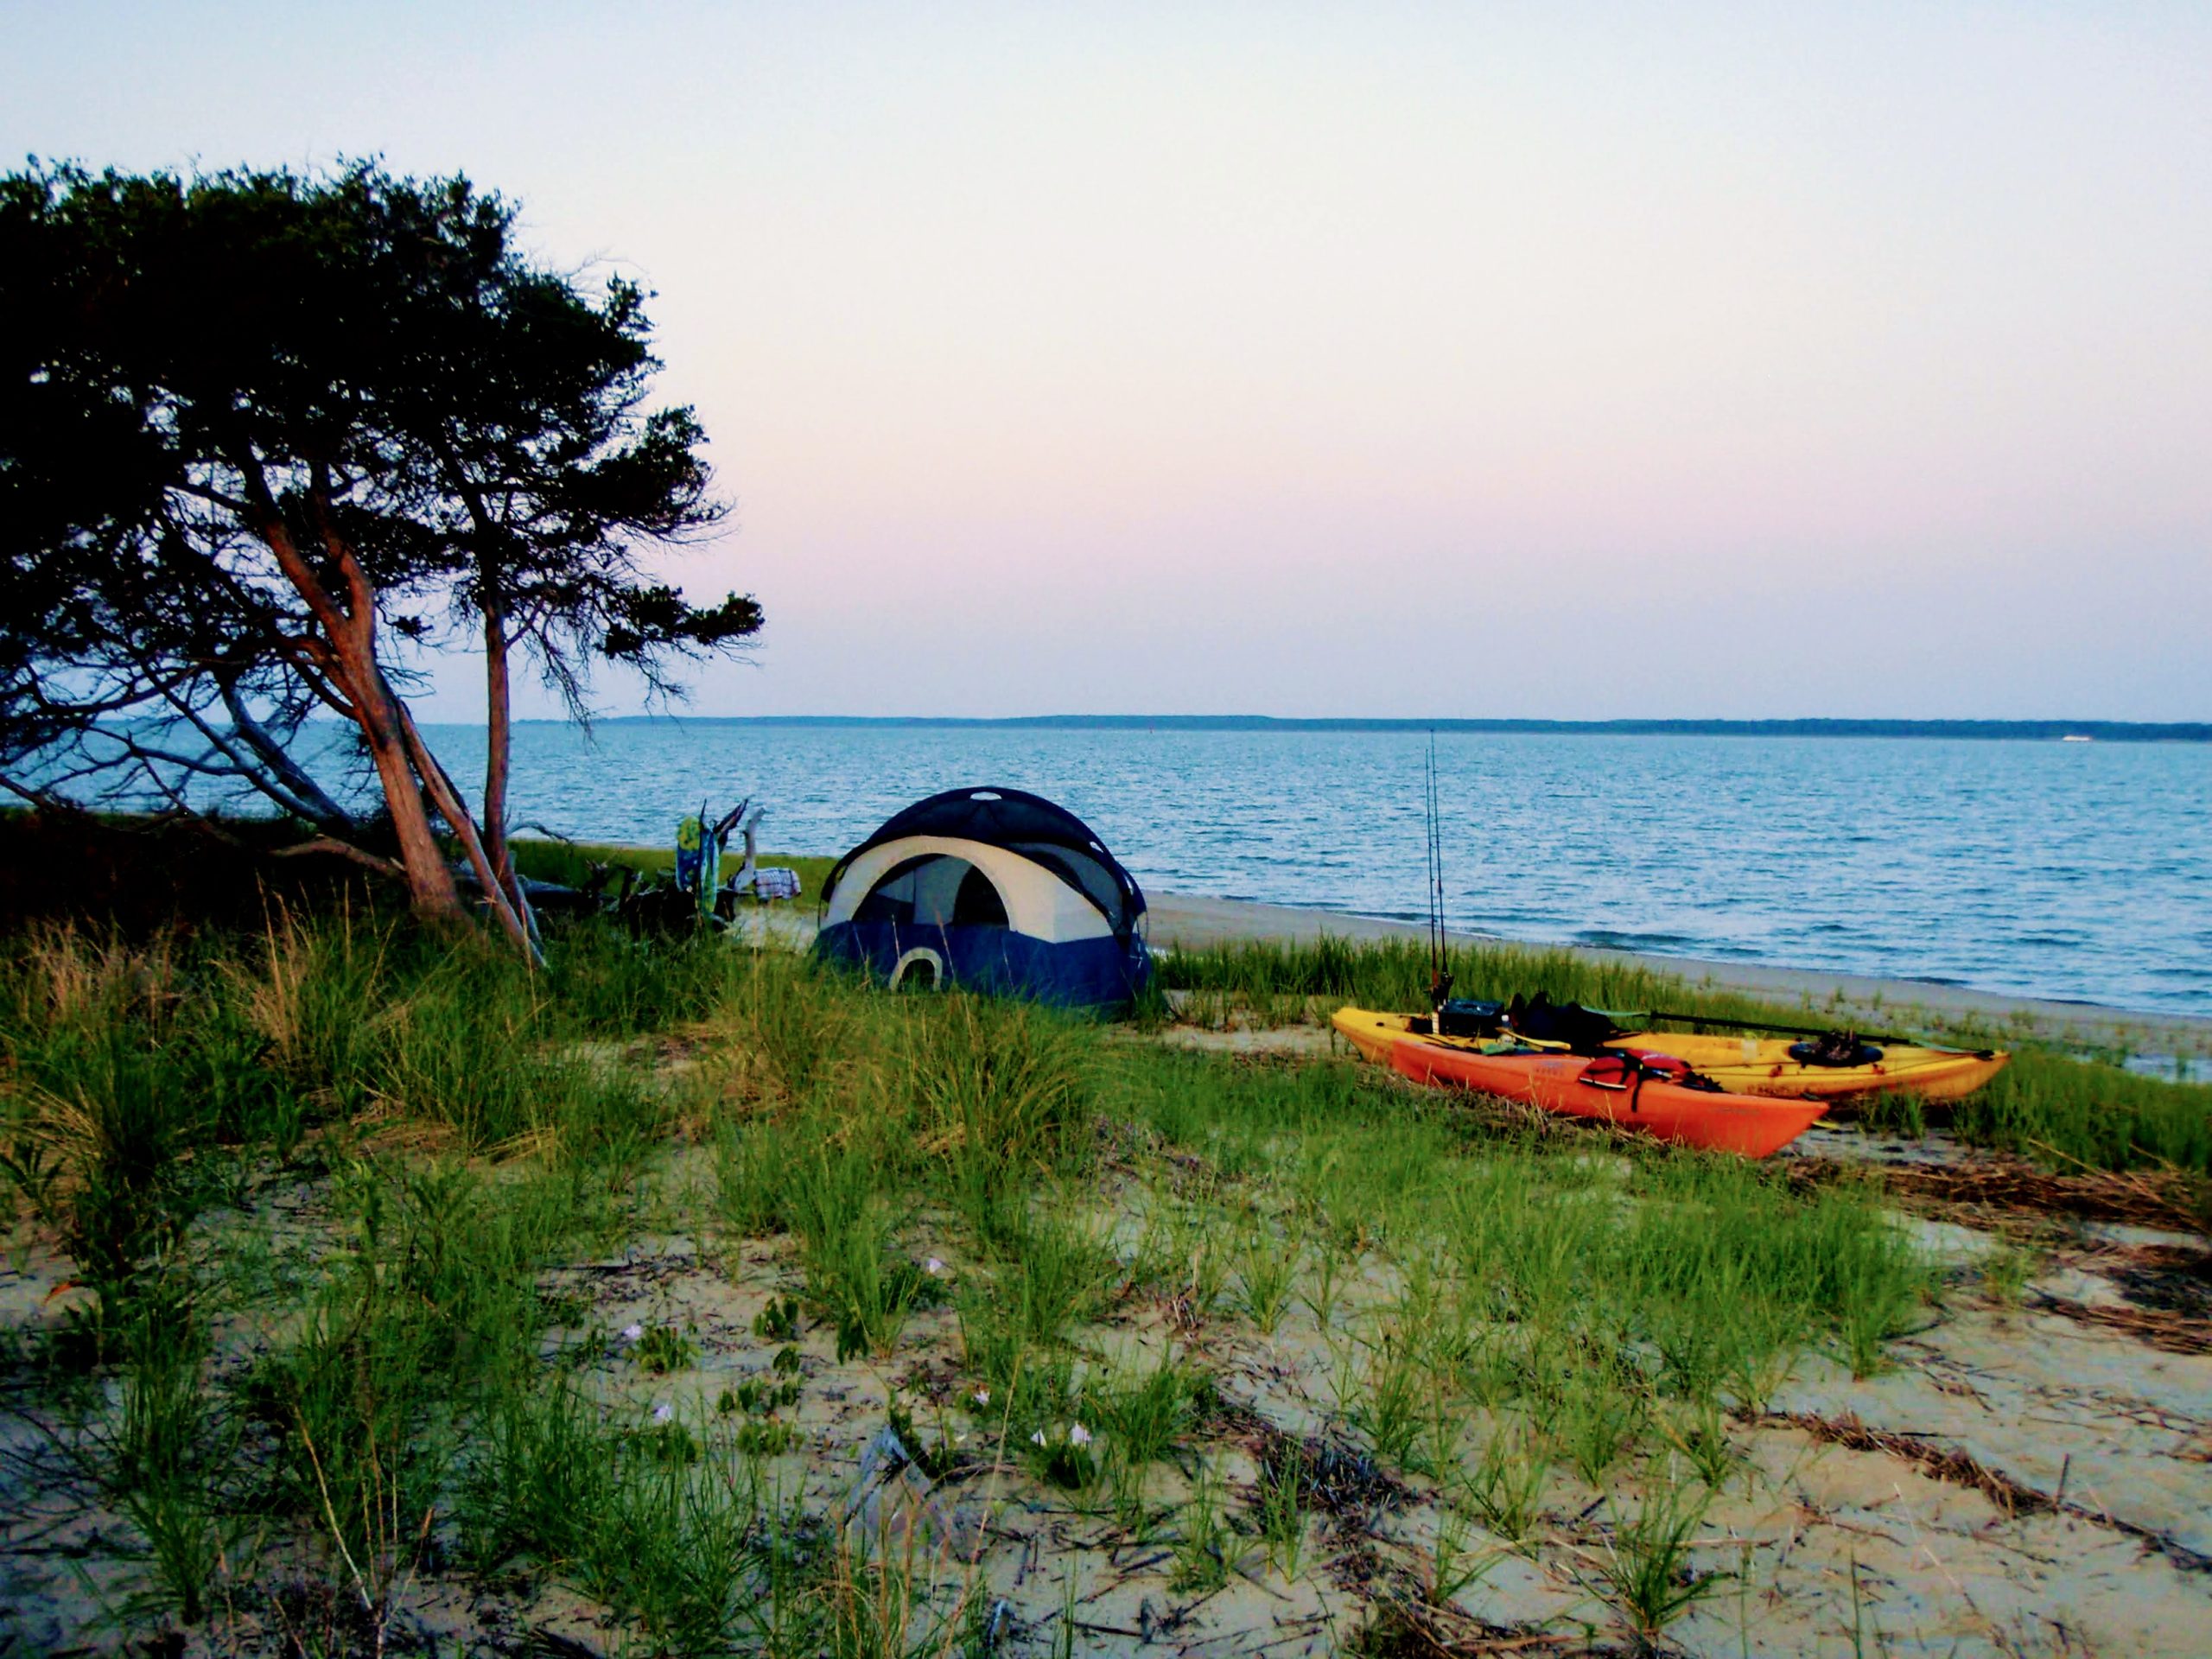 tent and two kayaks in the grass next to an open bay